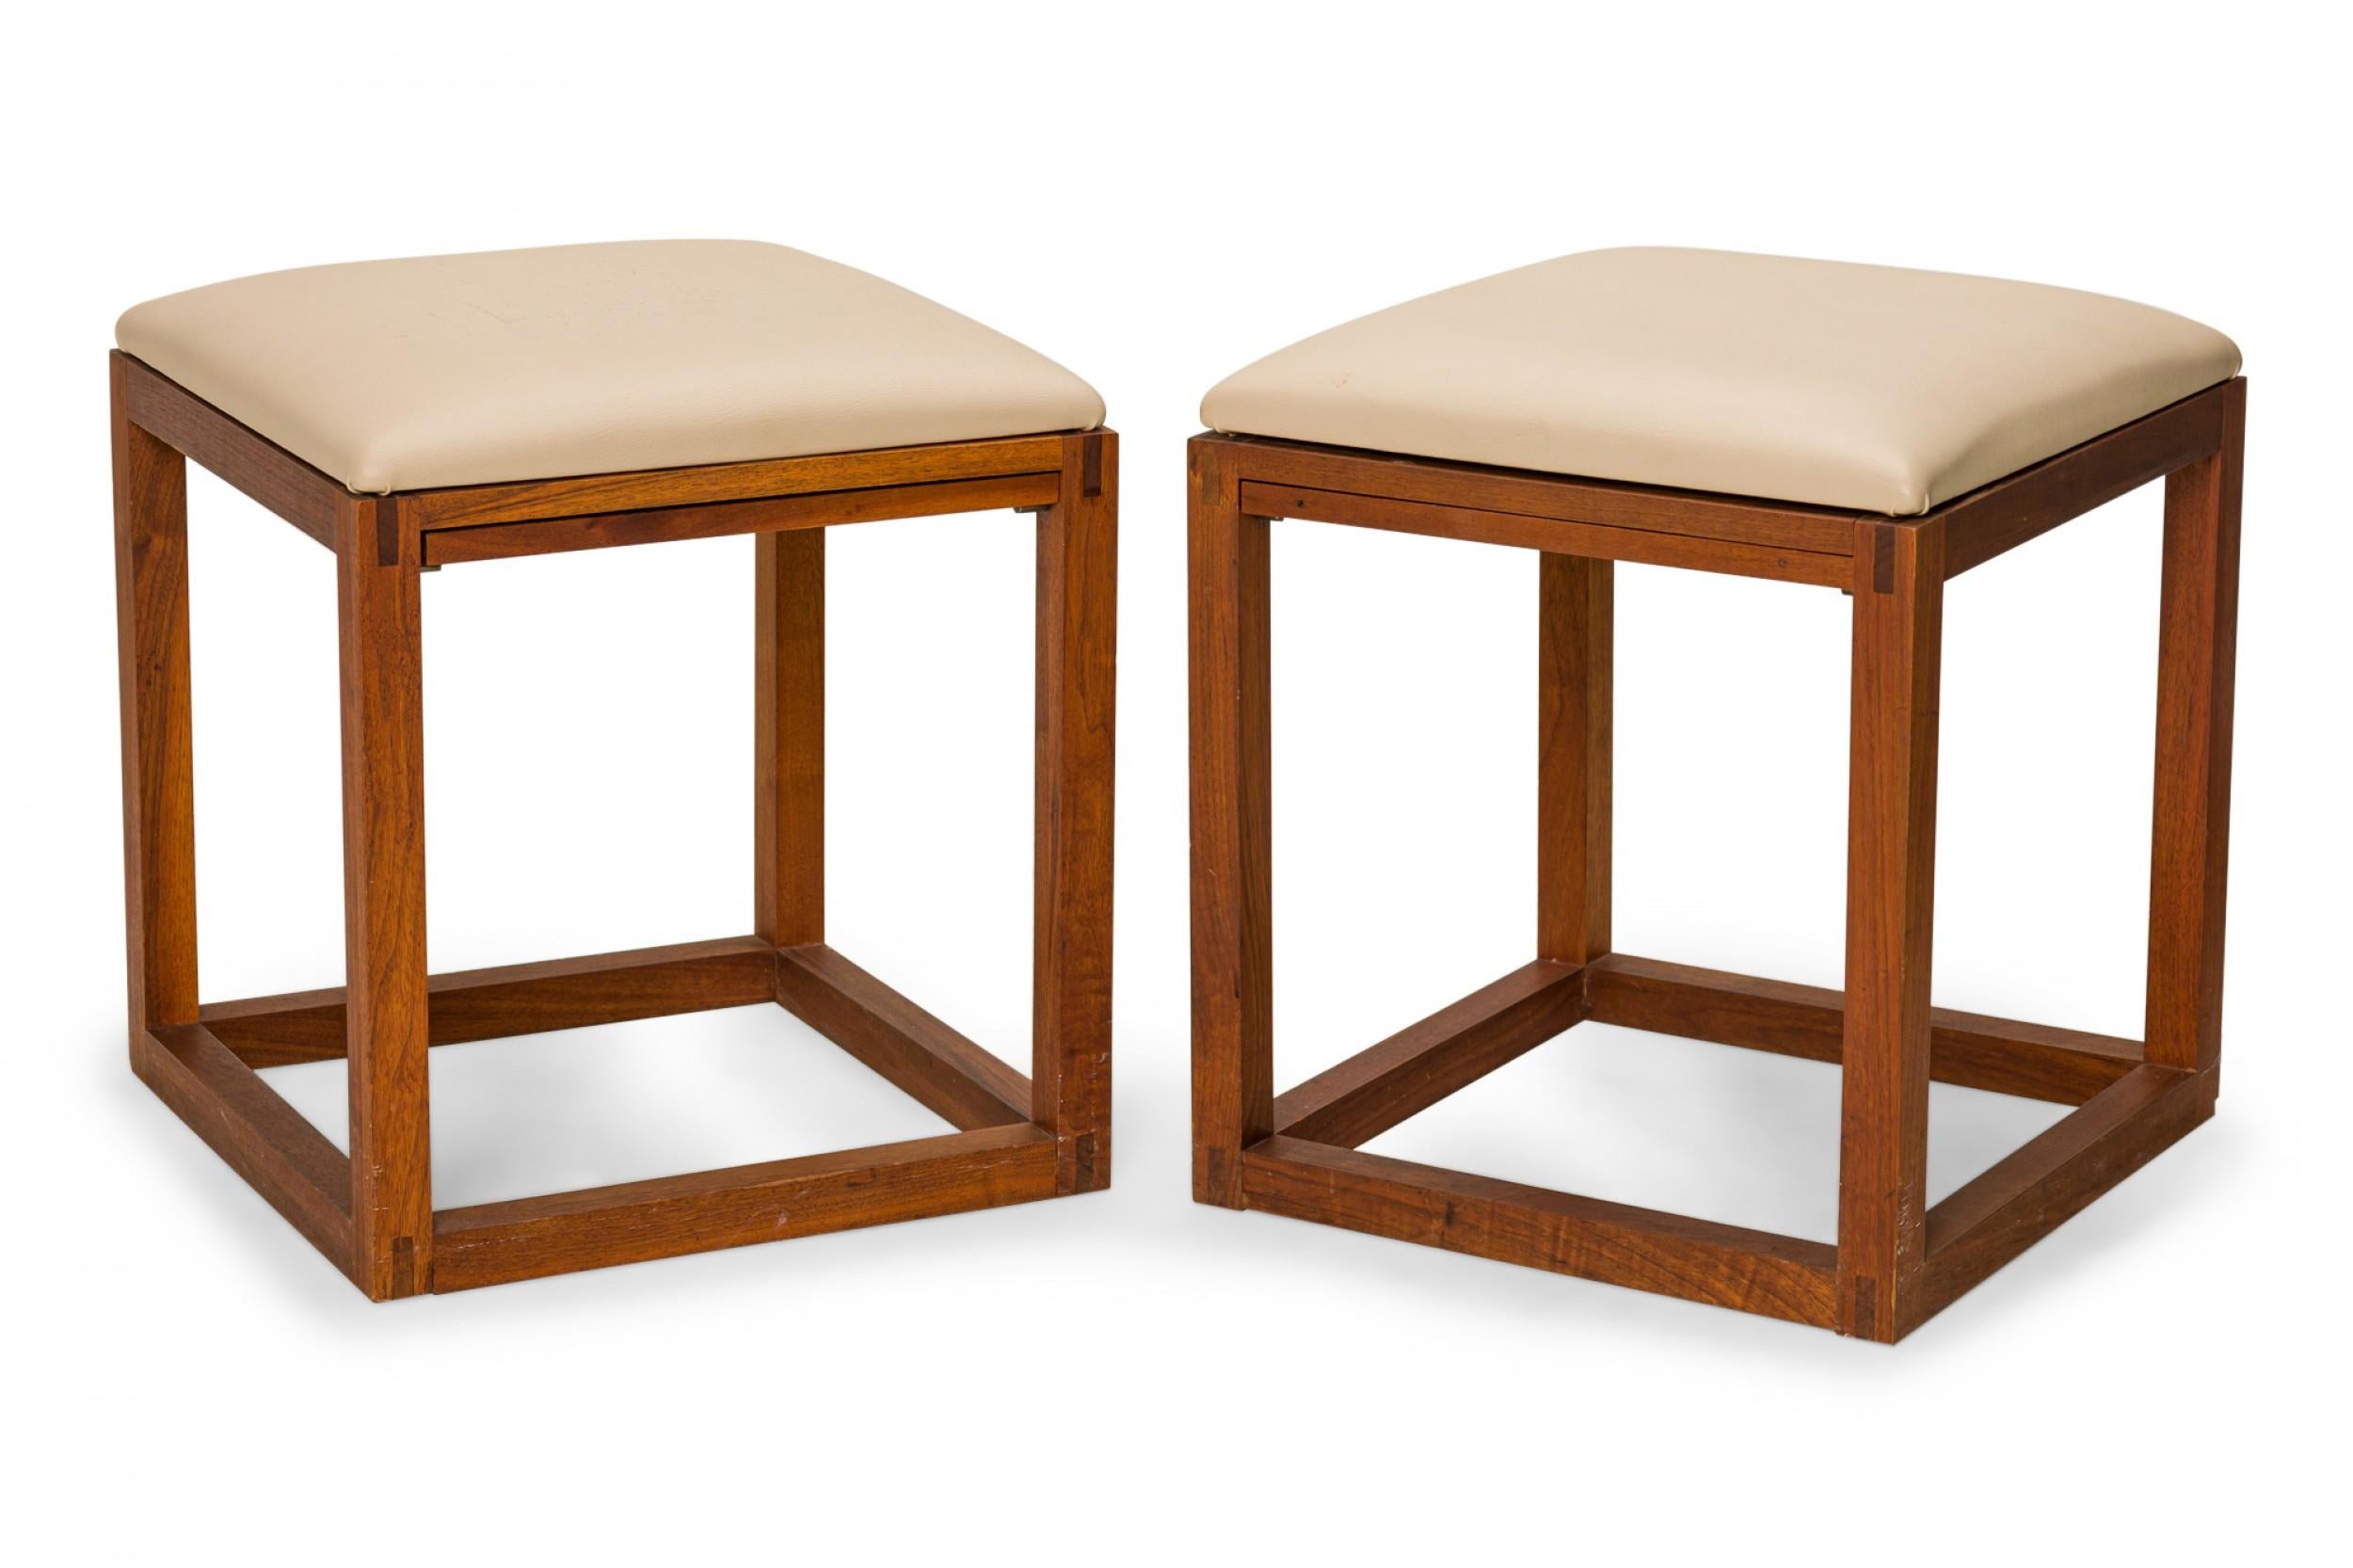 Pair of Tony Paul Gray Leather Upholstered Wooden Cube Stool with Slide Tray